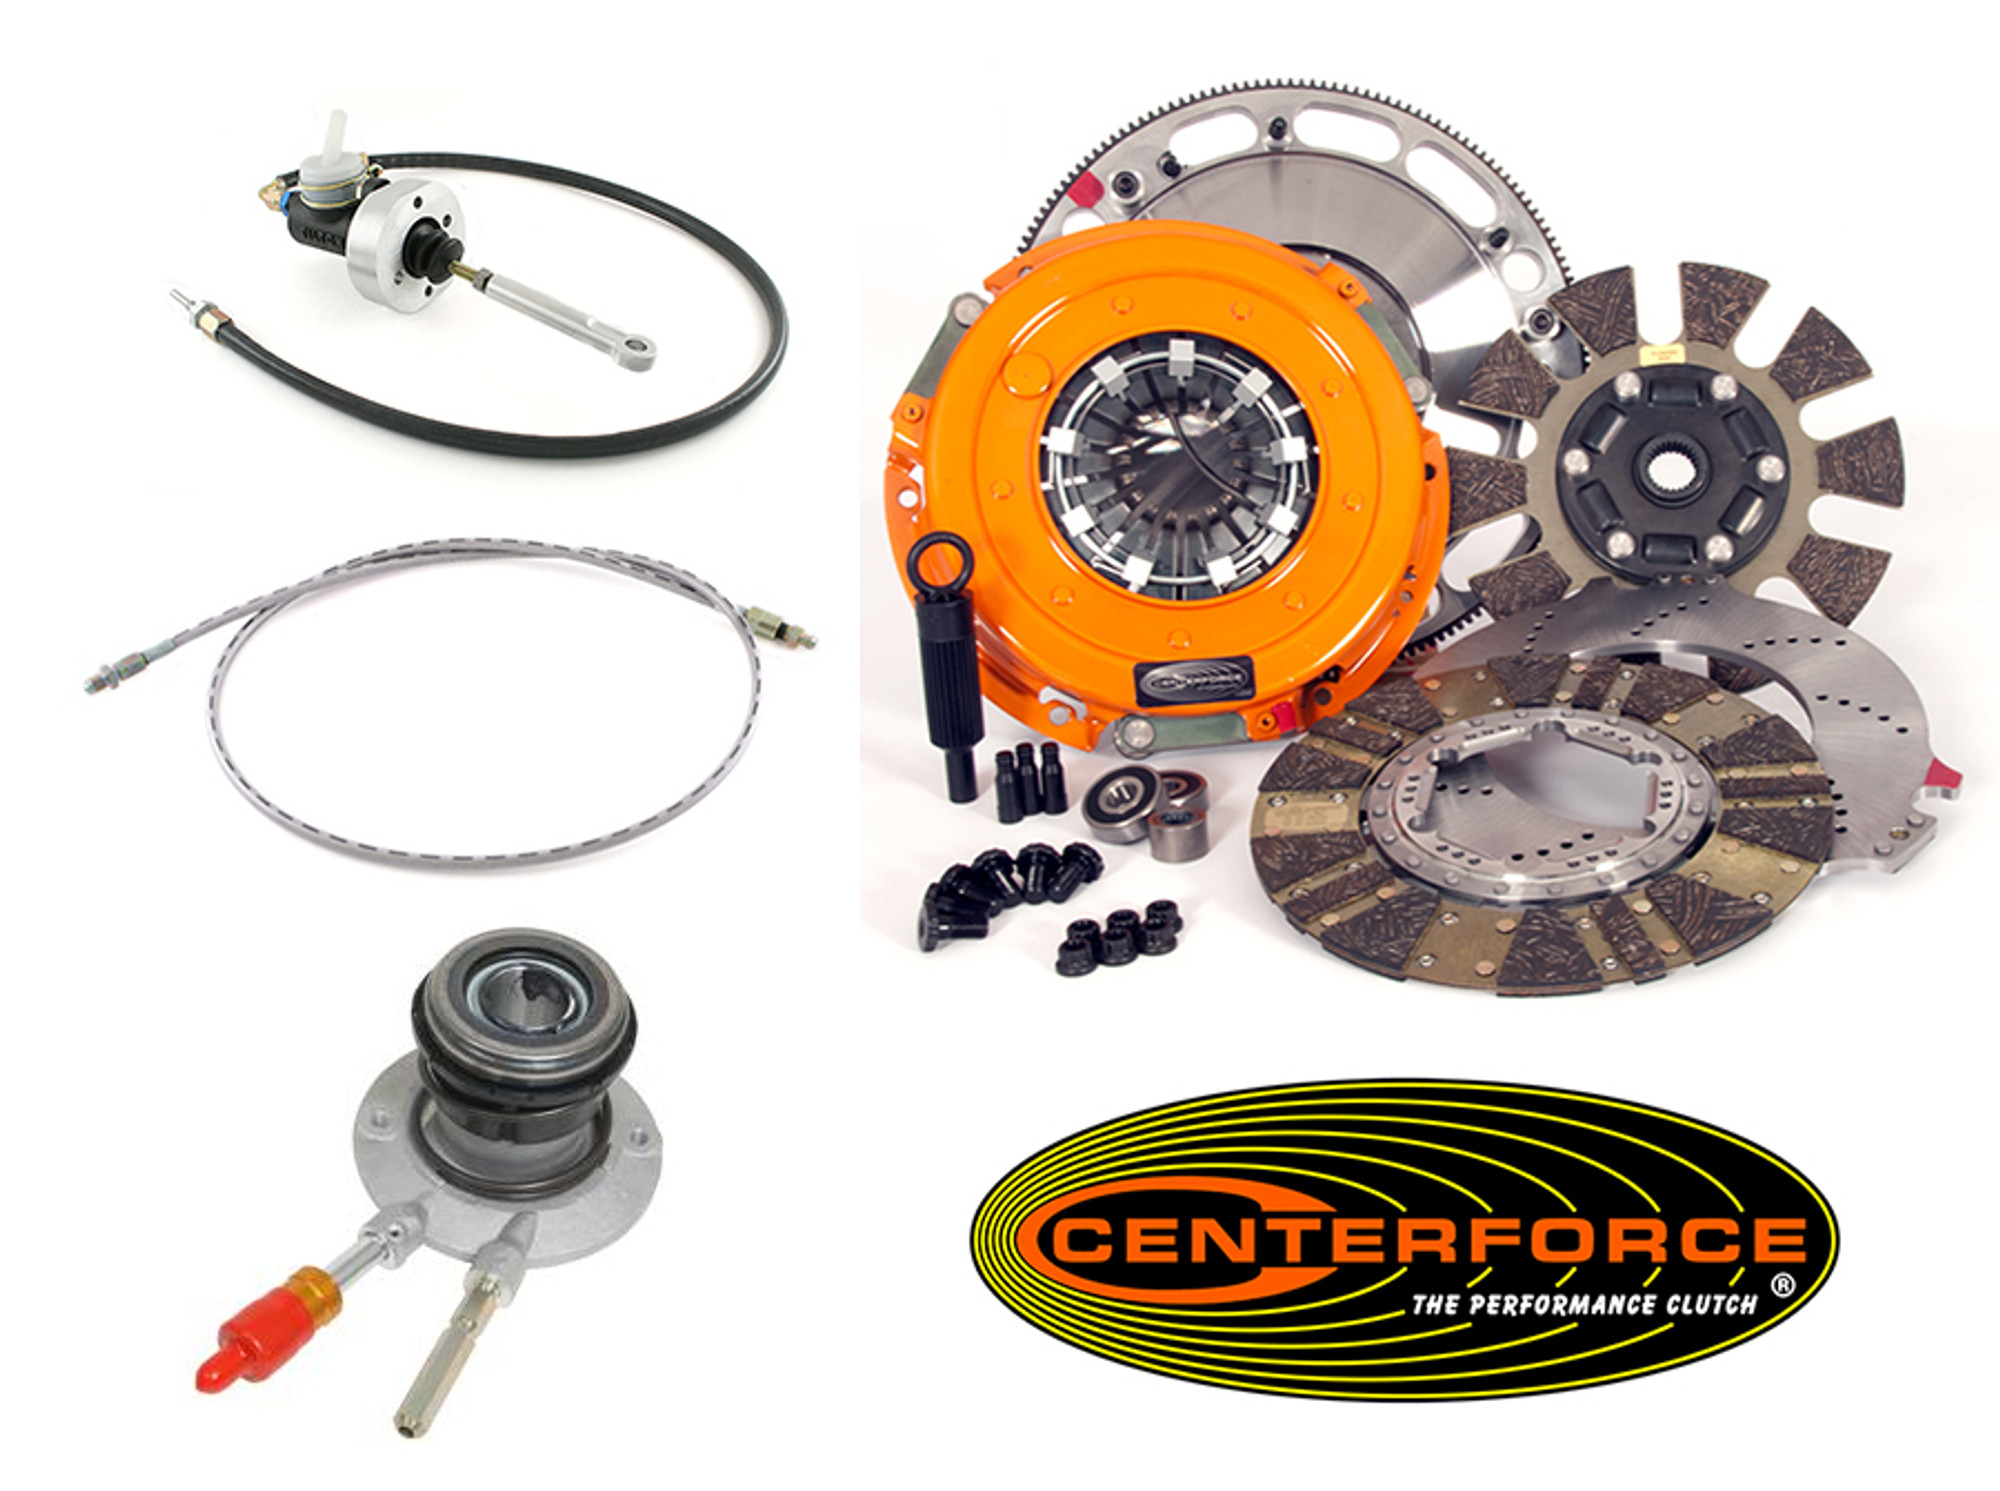 Tick Perf & Centerforce DYAD Complete Clutch & Hydraulic Upgrade Package 2004-2006 Pontiac GTO